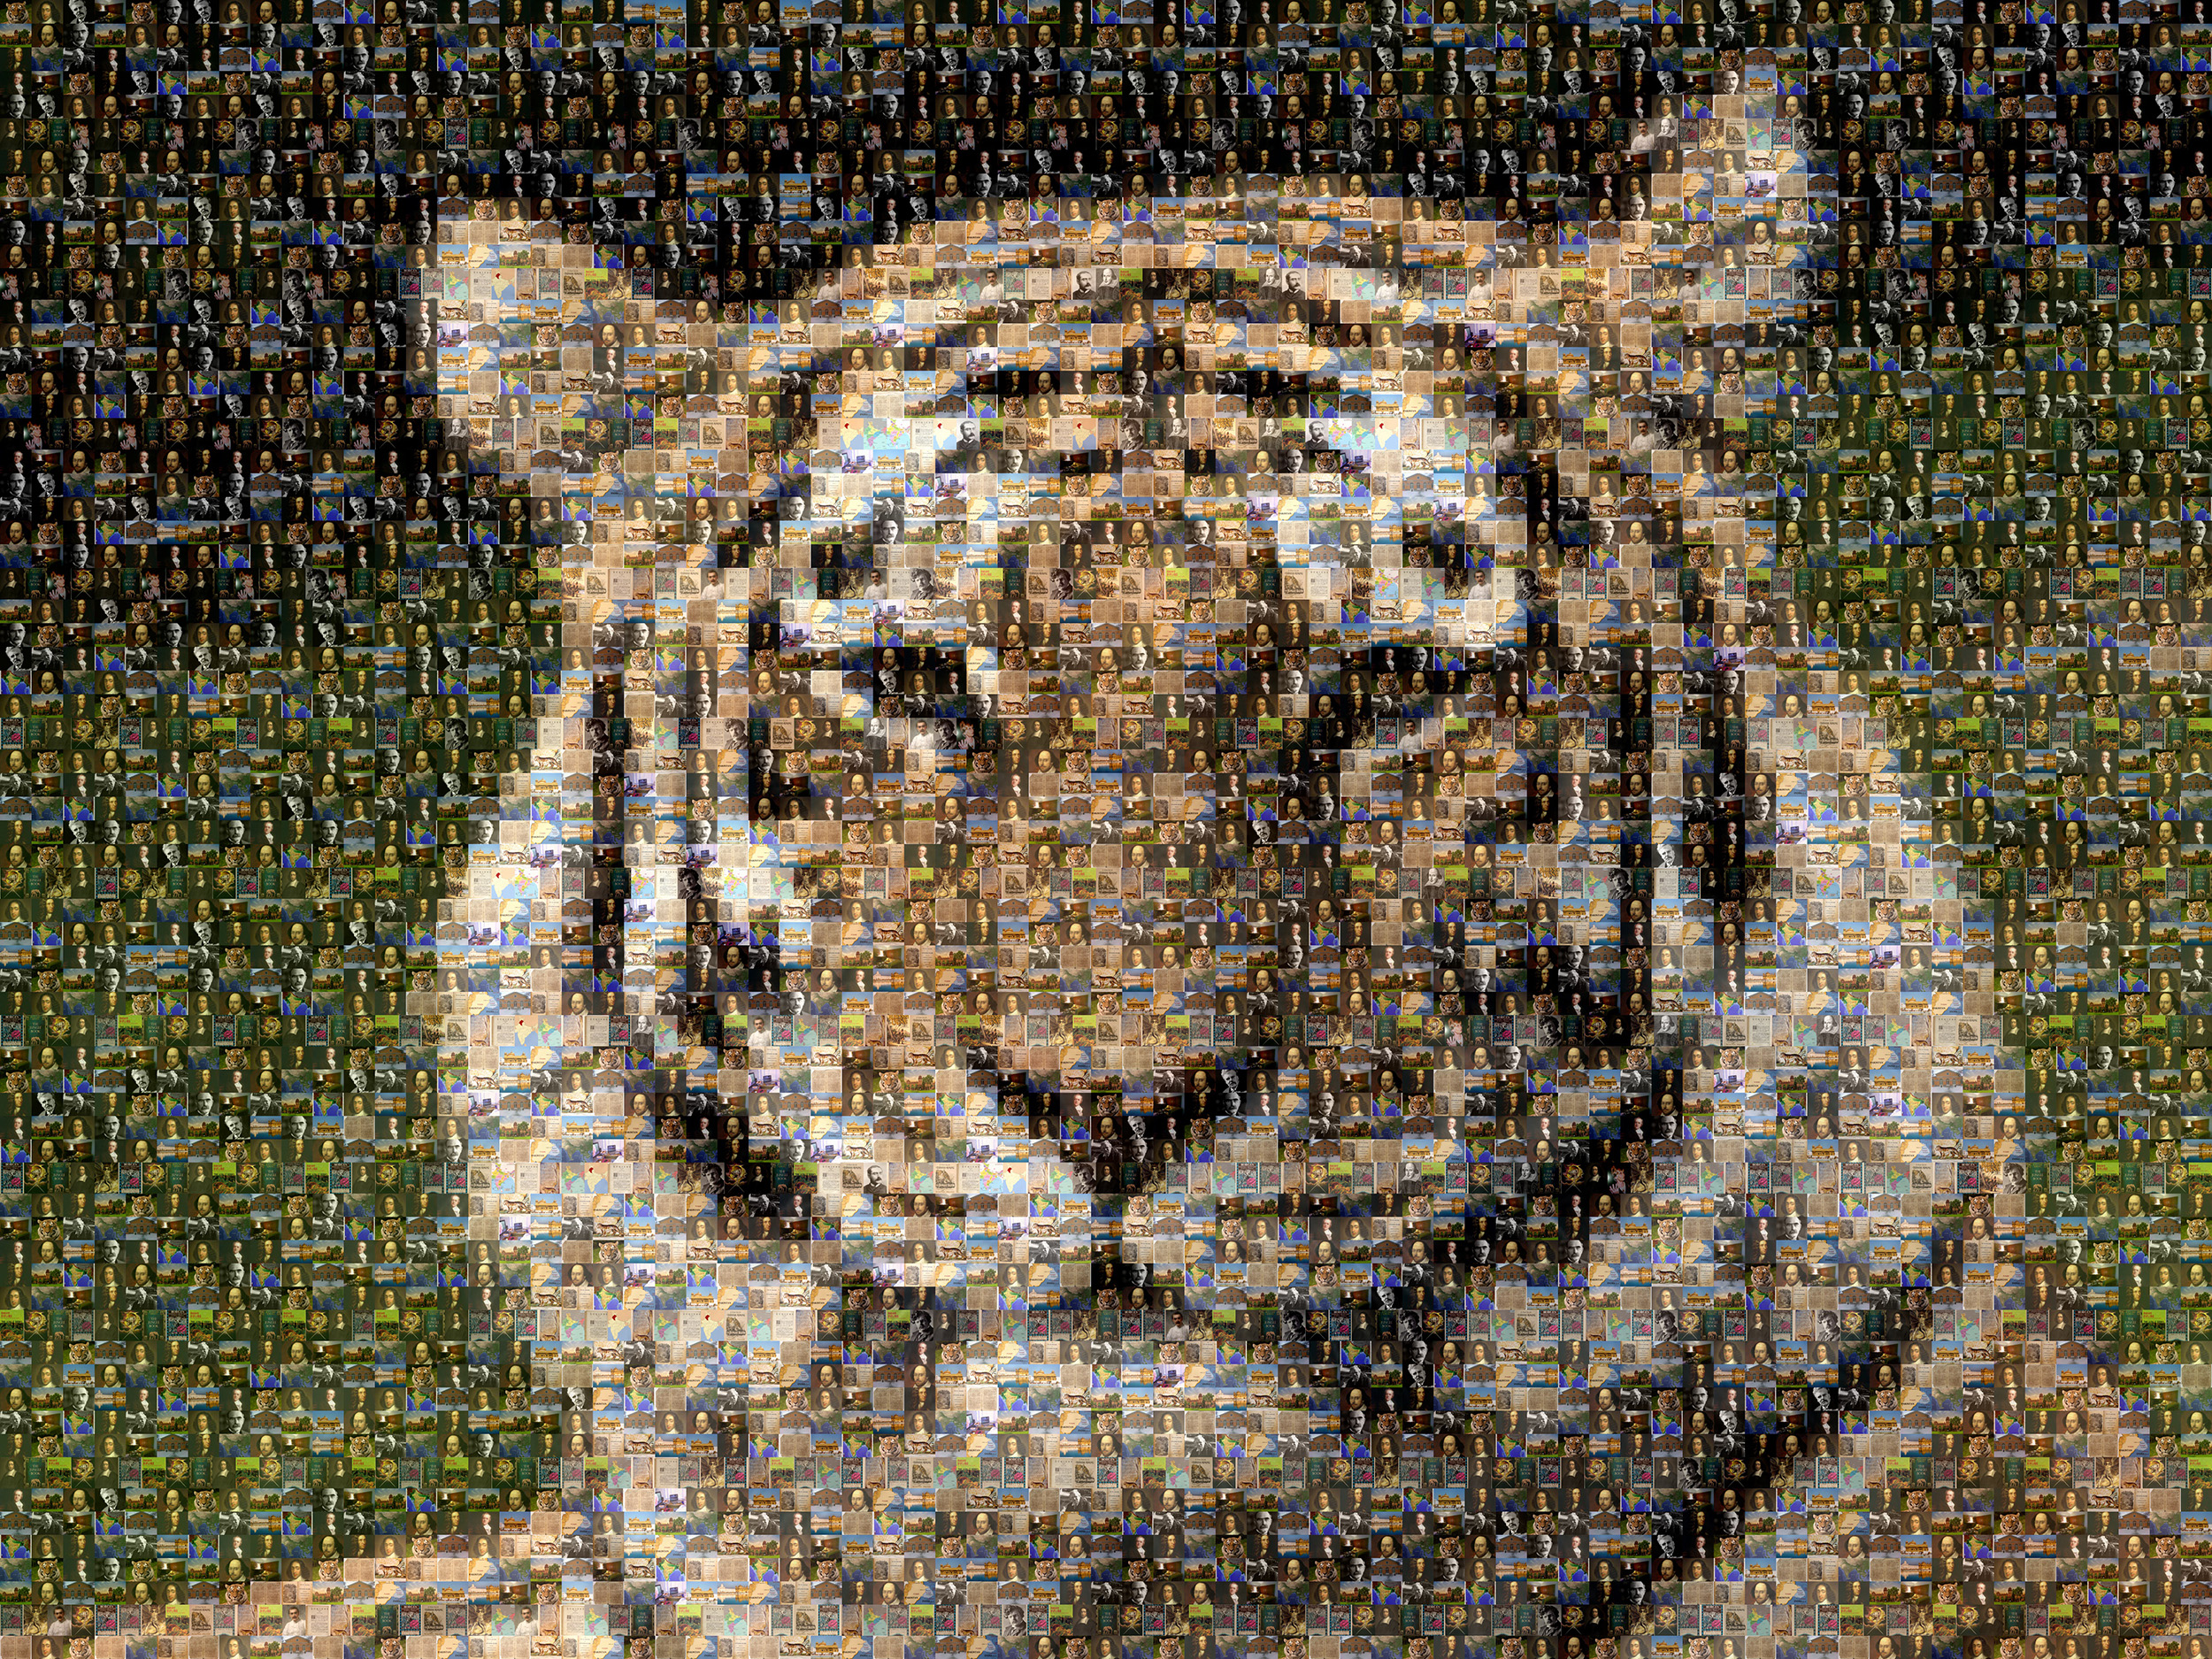 Image of a tiger created with 5000 tiles. The image of the tiger that serves as a template for the mosaic was obtained from Wipipedia Commons (https://es .m.wikipedia.org/wiki/File:Siberischer_tiger_de_edit02.jpg; attribution- ShareAlike 2.5 Generic (CC BY-SA 2.5)). The image was built by the author of this article using the free software AndreaMosaic (http://www.andreaplanet.com/andreamosaic/).